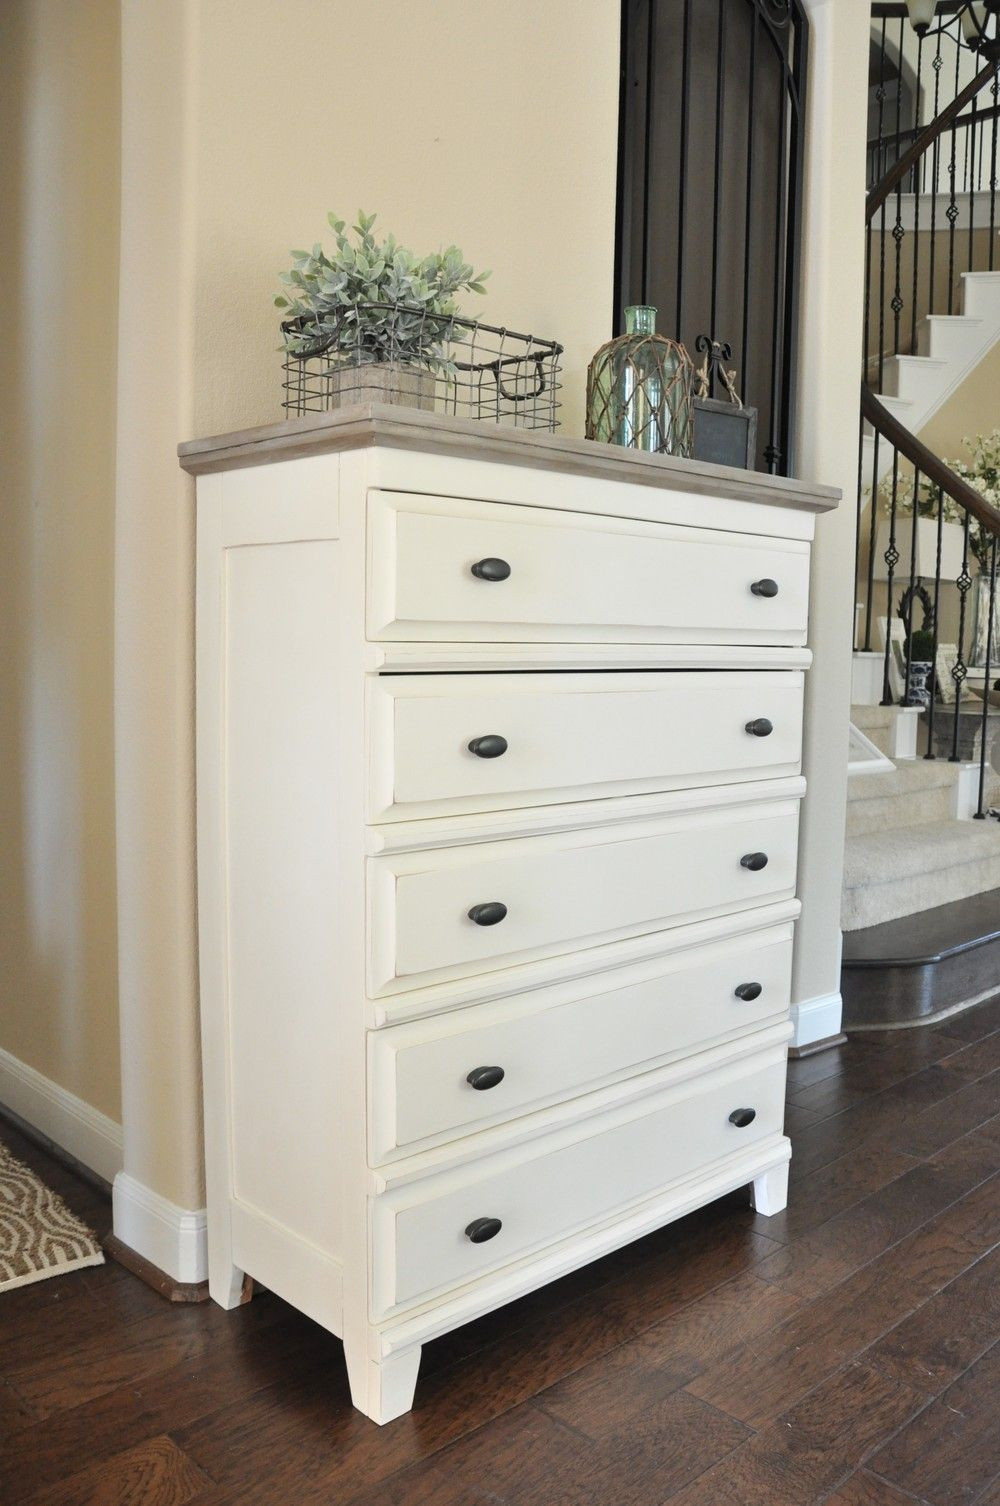 Chalk Paint Bedroom Furniture
 From Transitional to Cottage Style With Chalk Paint